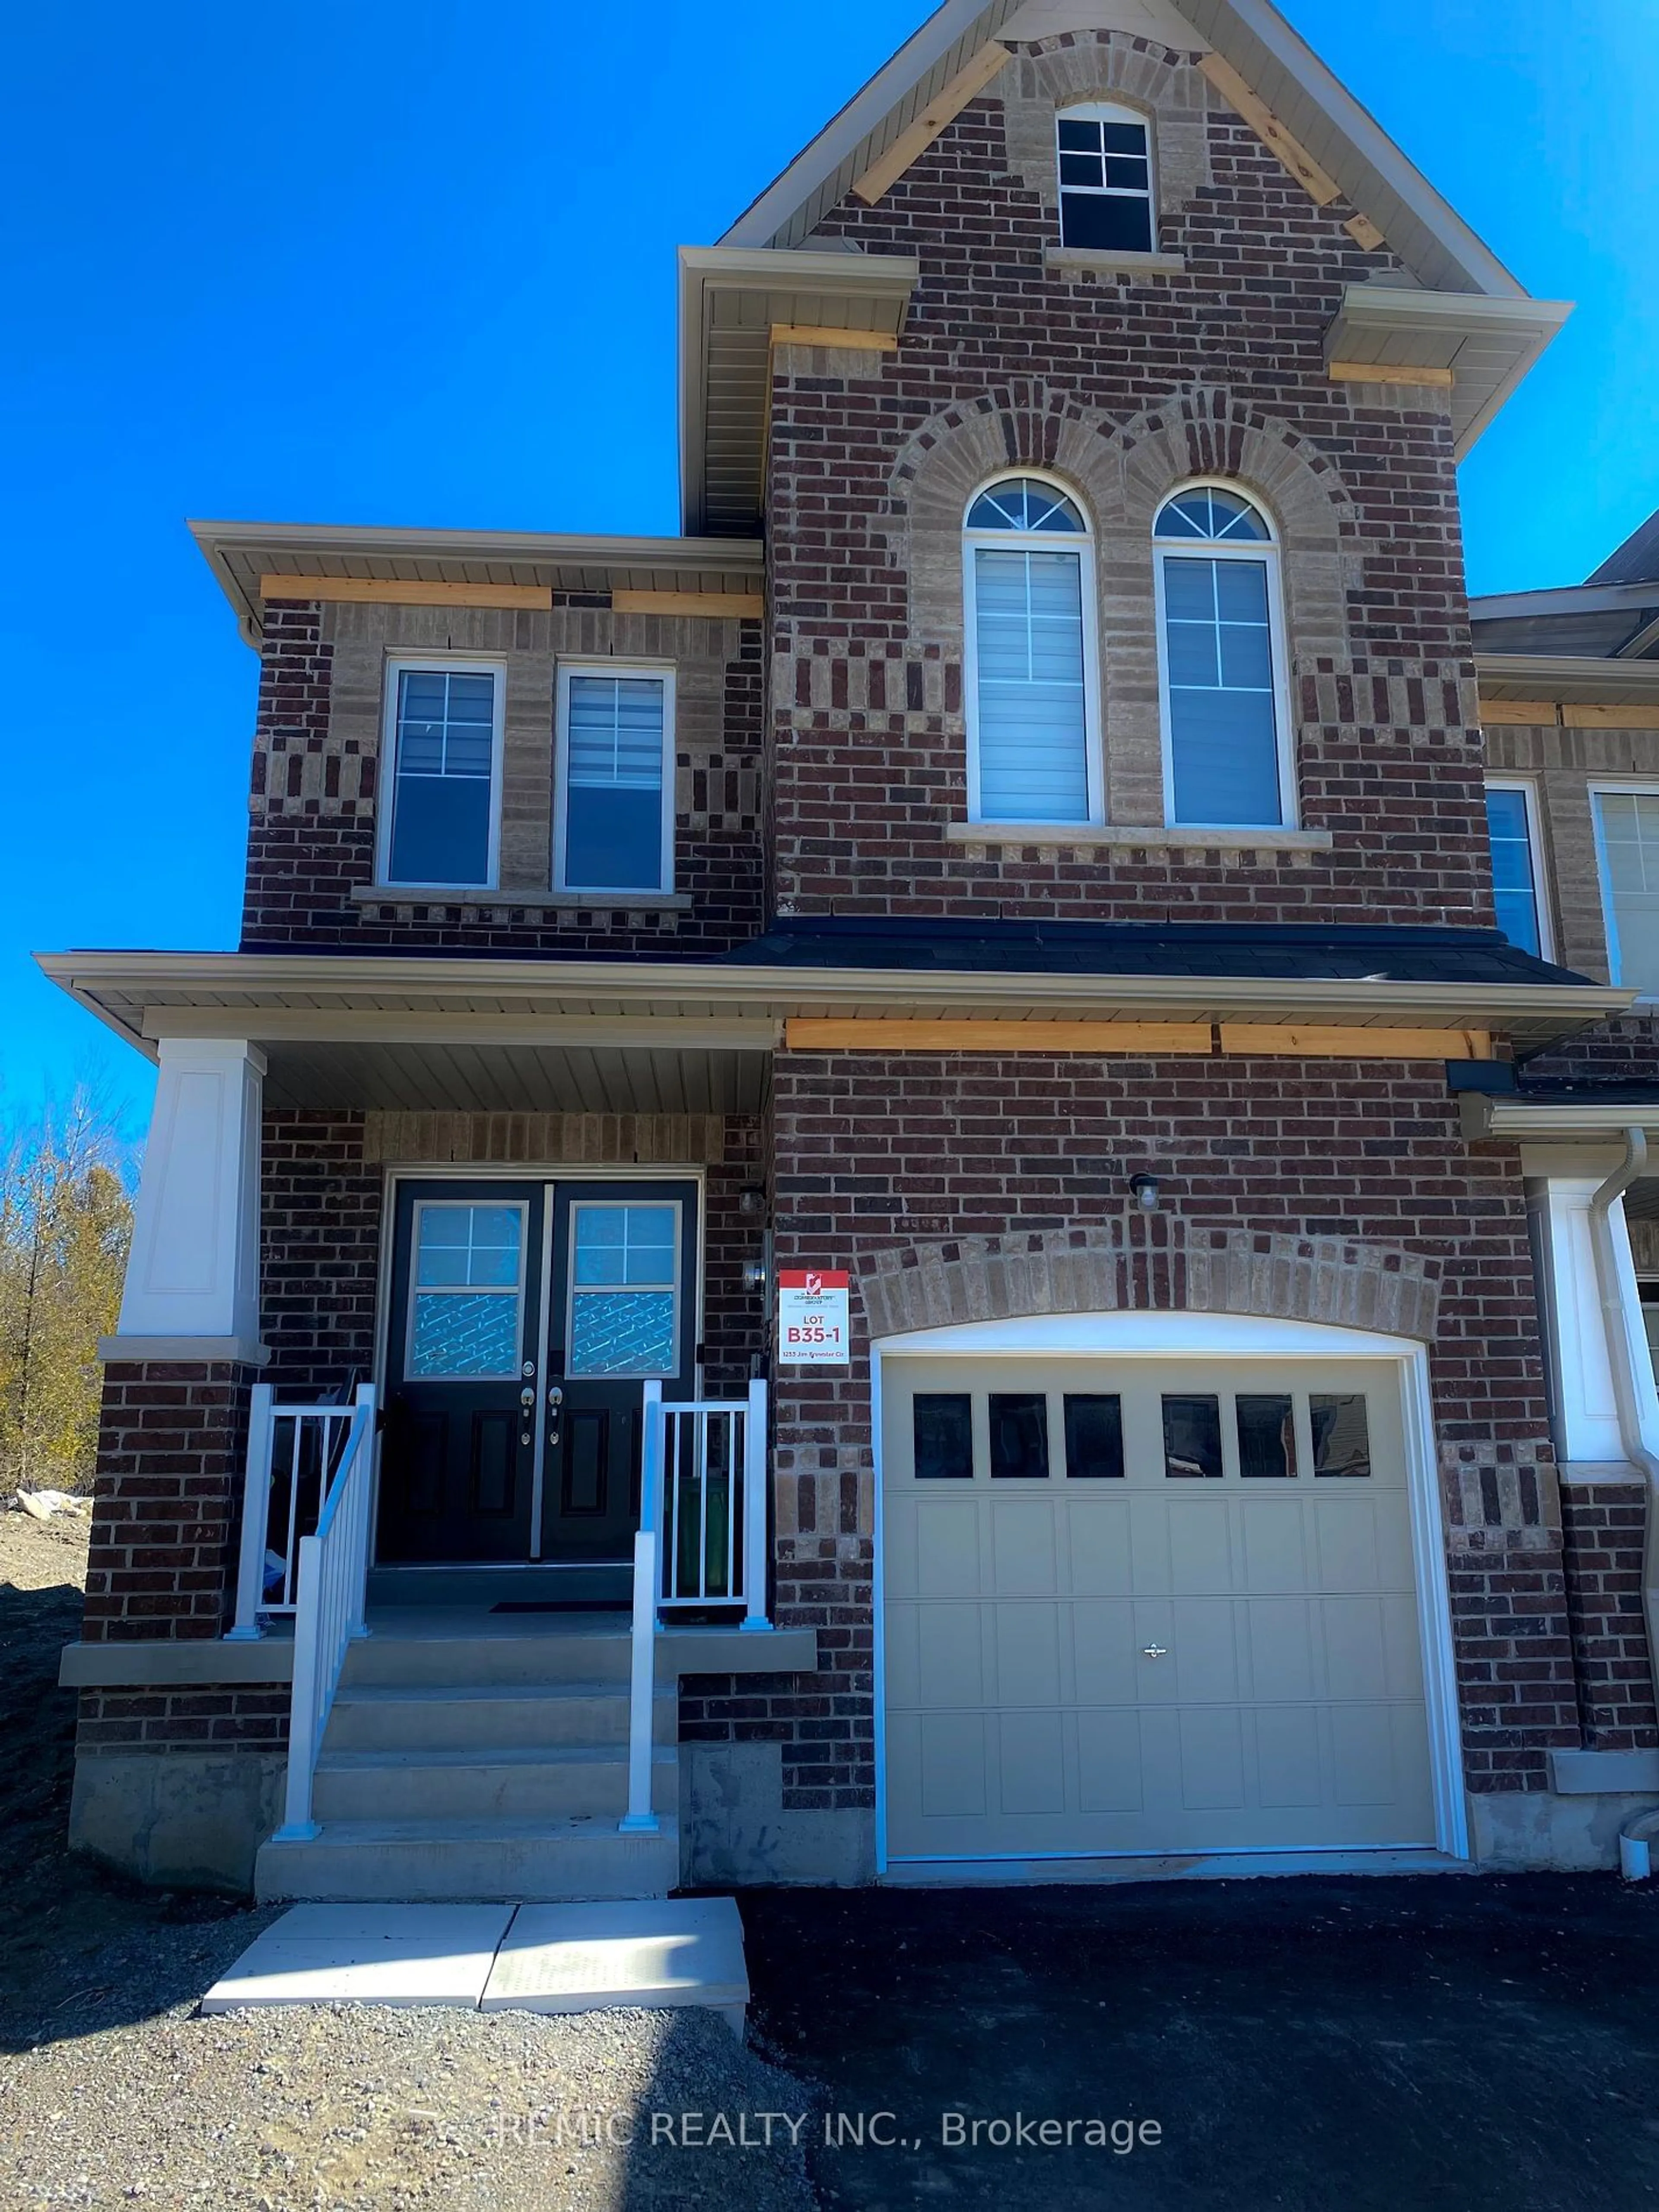 Home with brick exterior material for 1253 Jim Brewster Circ, Oshawa Ontario L1G 7S1